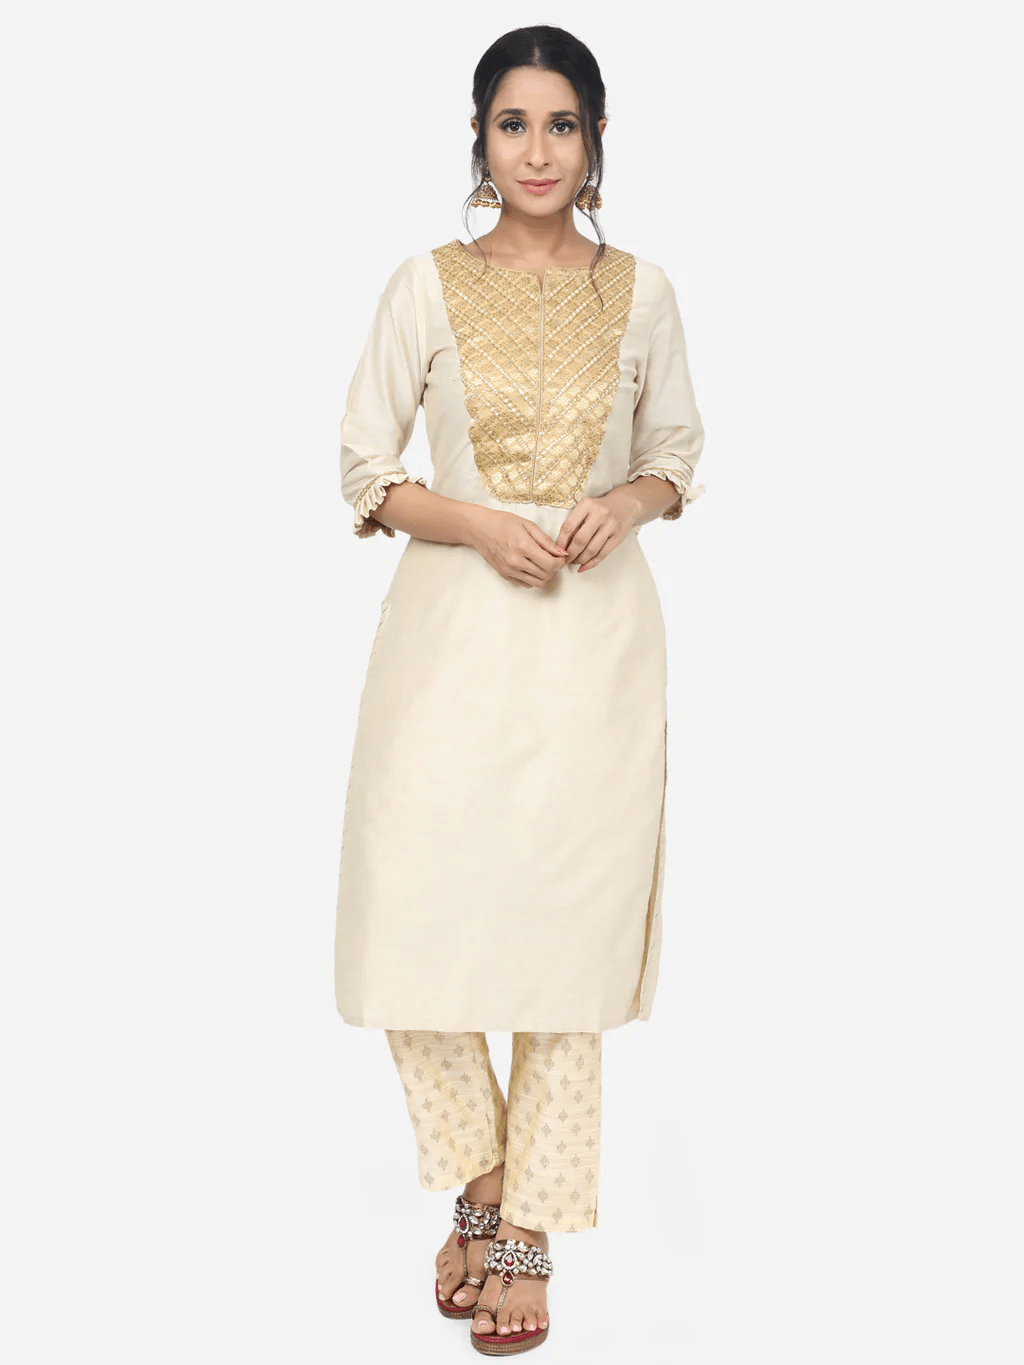 Pentacrafts South Cotton Multi Color V-Neck, Half Sleeve Design Kurti For  Women at Rs 210 | Tail Cut Kurti in Bolpur | ID: 22529627097